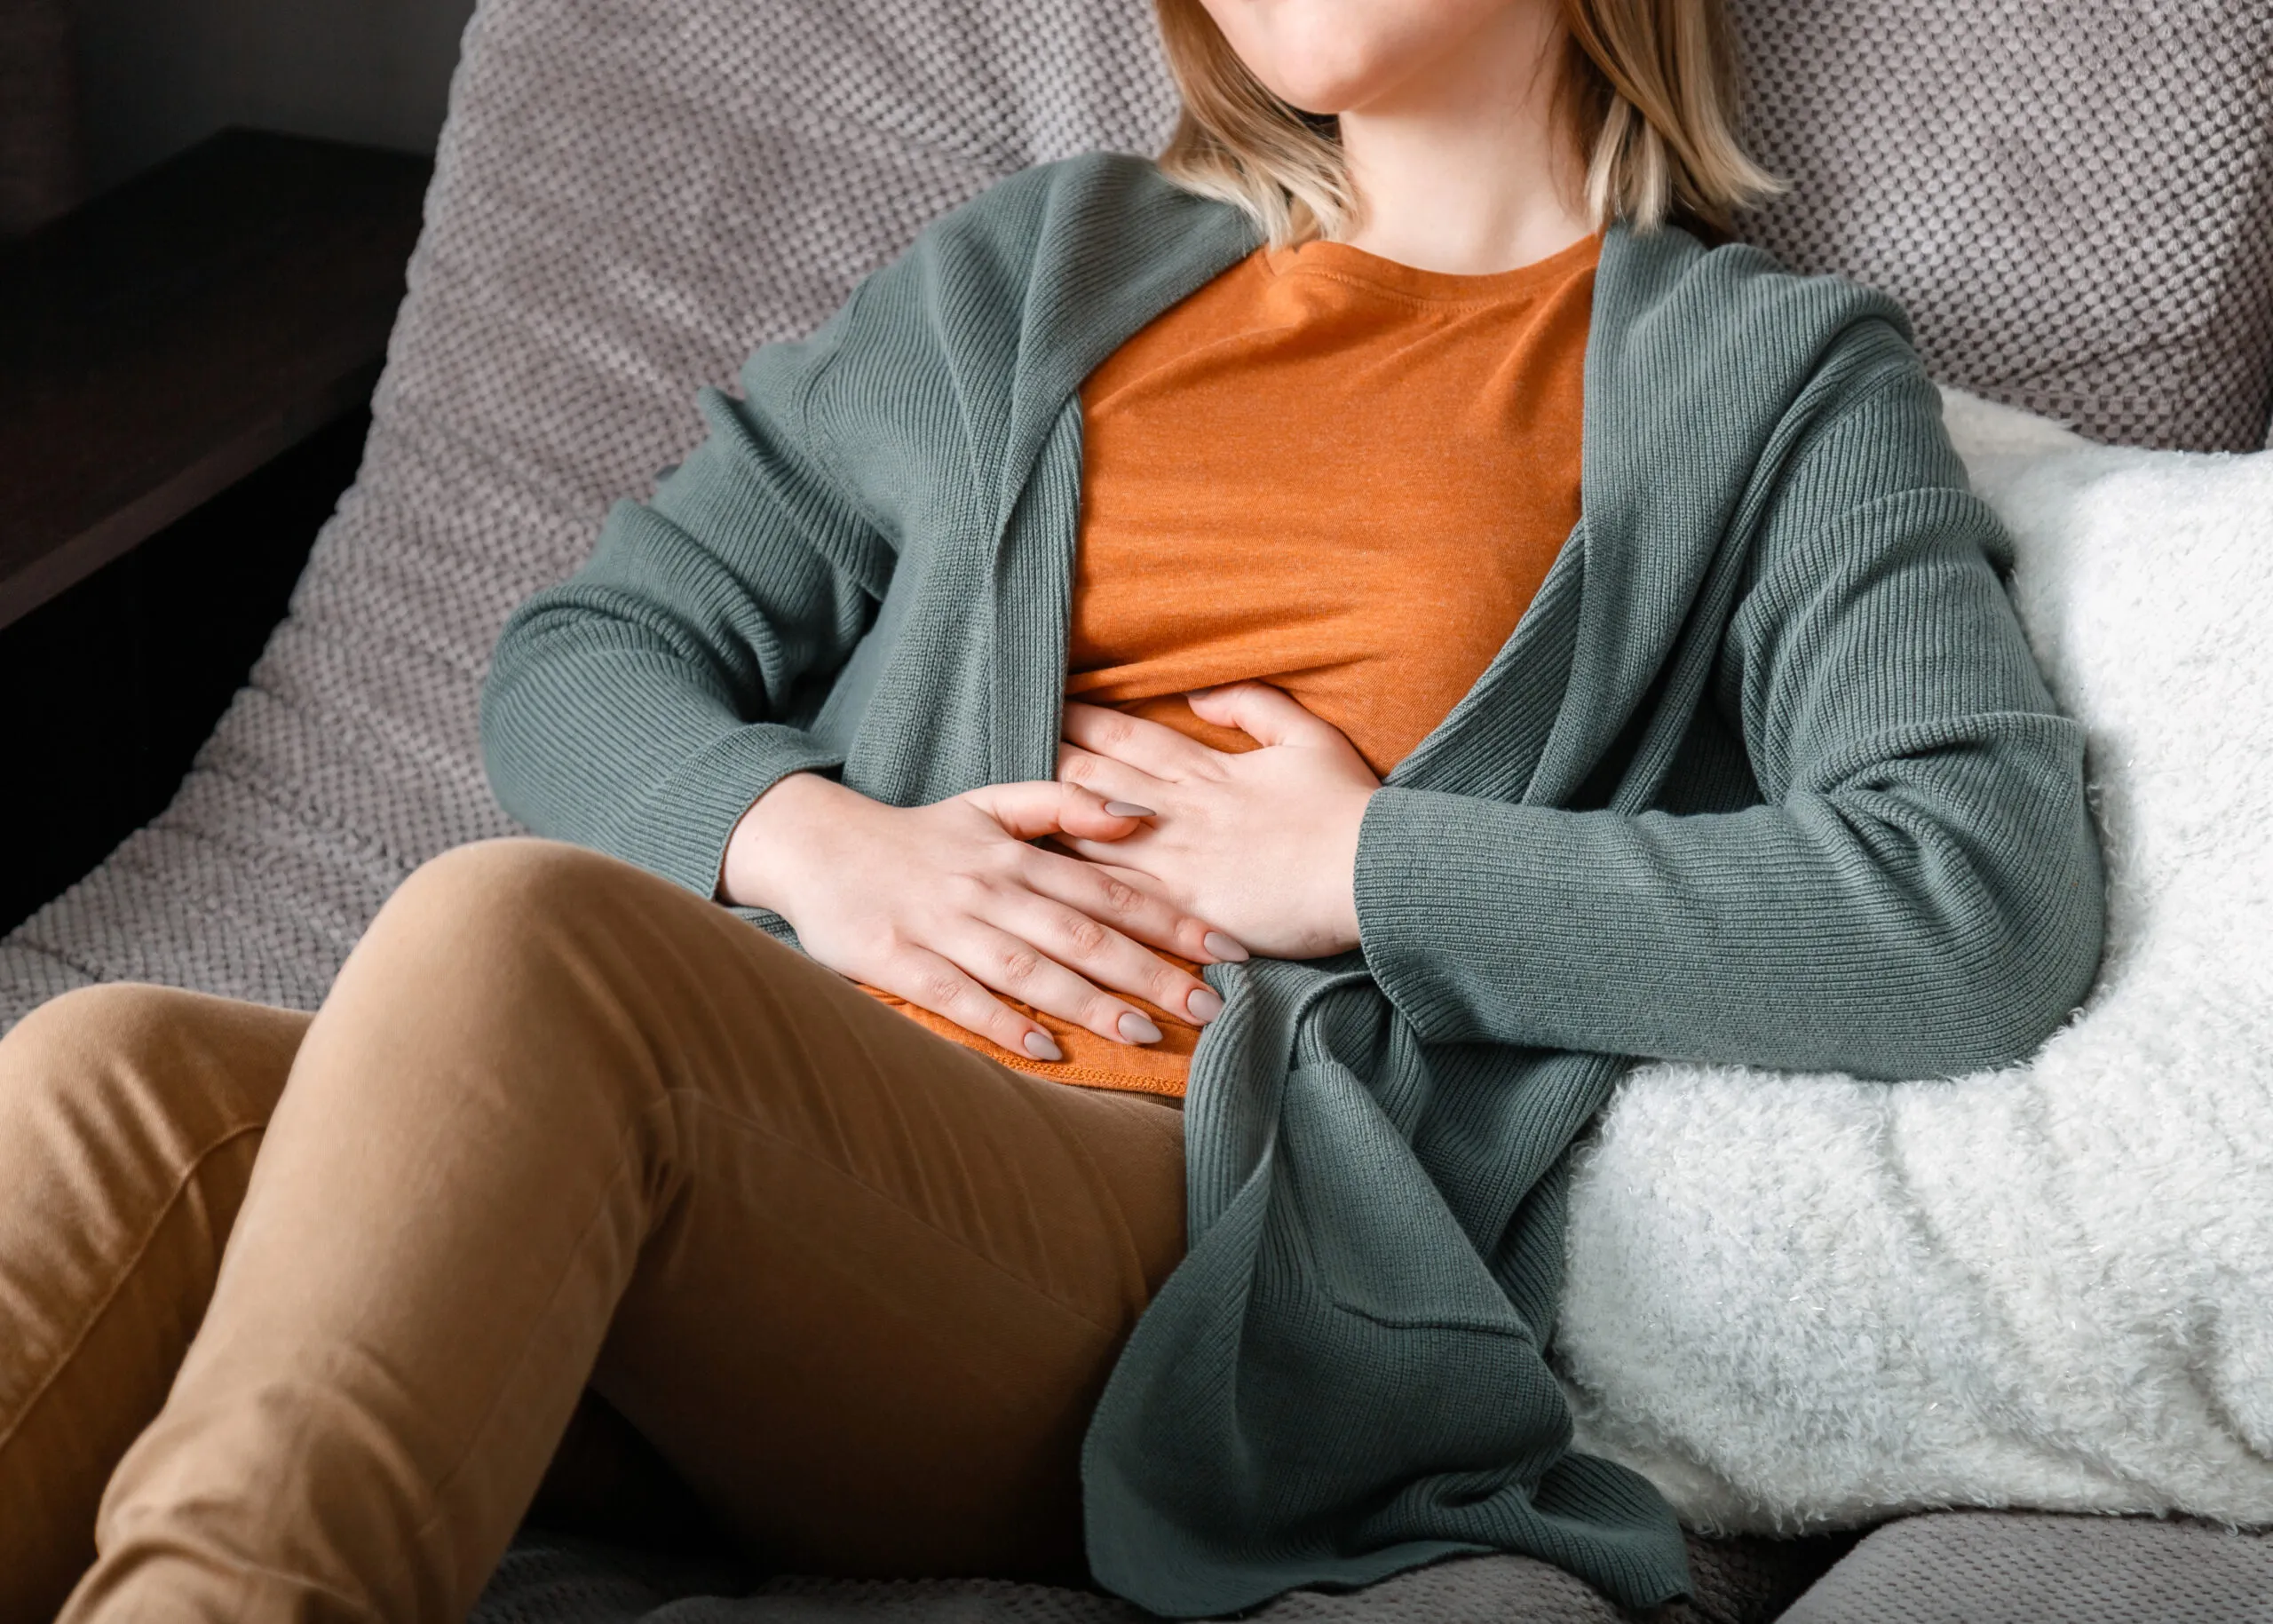 Exocrine Pancreatic Insufficiency: Signs, Causes, Risk Factors, and Treatment